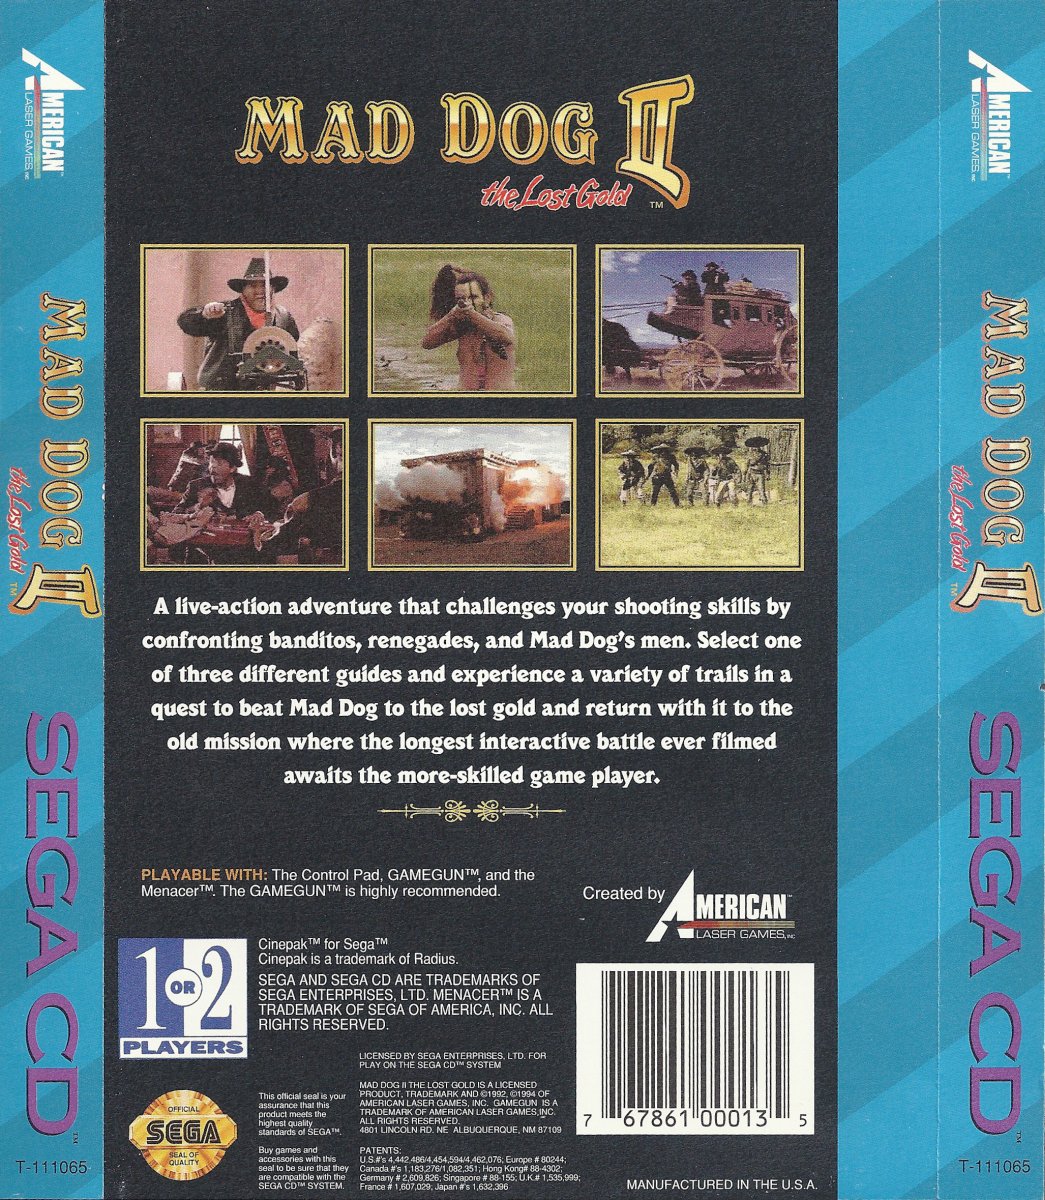 Mad Dog II: The Lost Gold cover